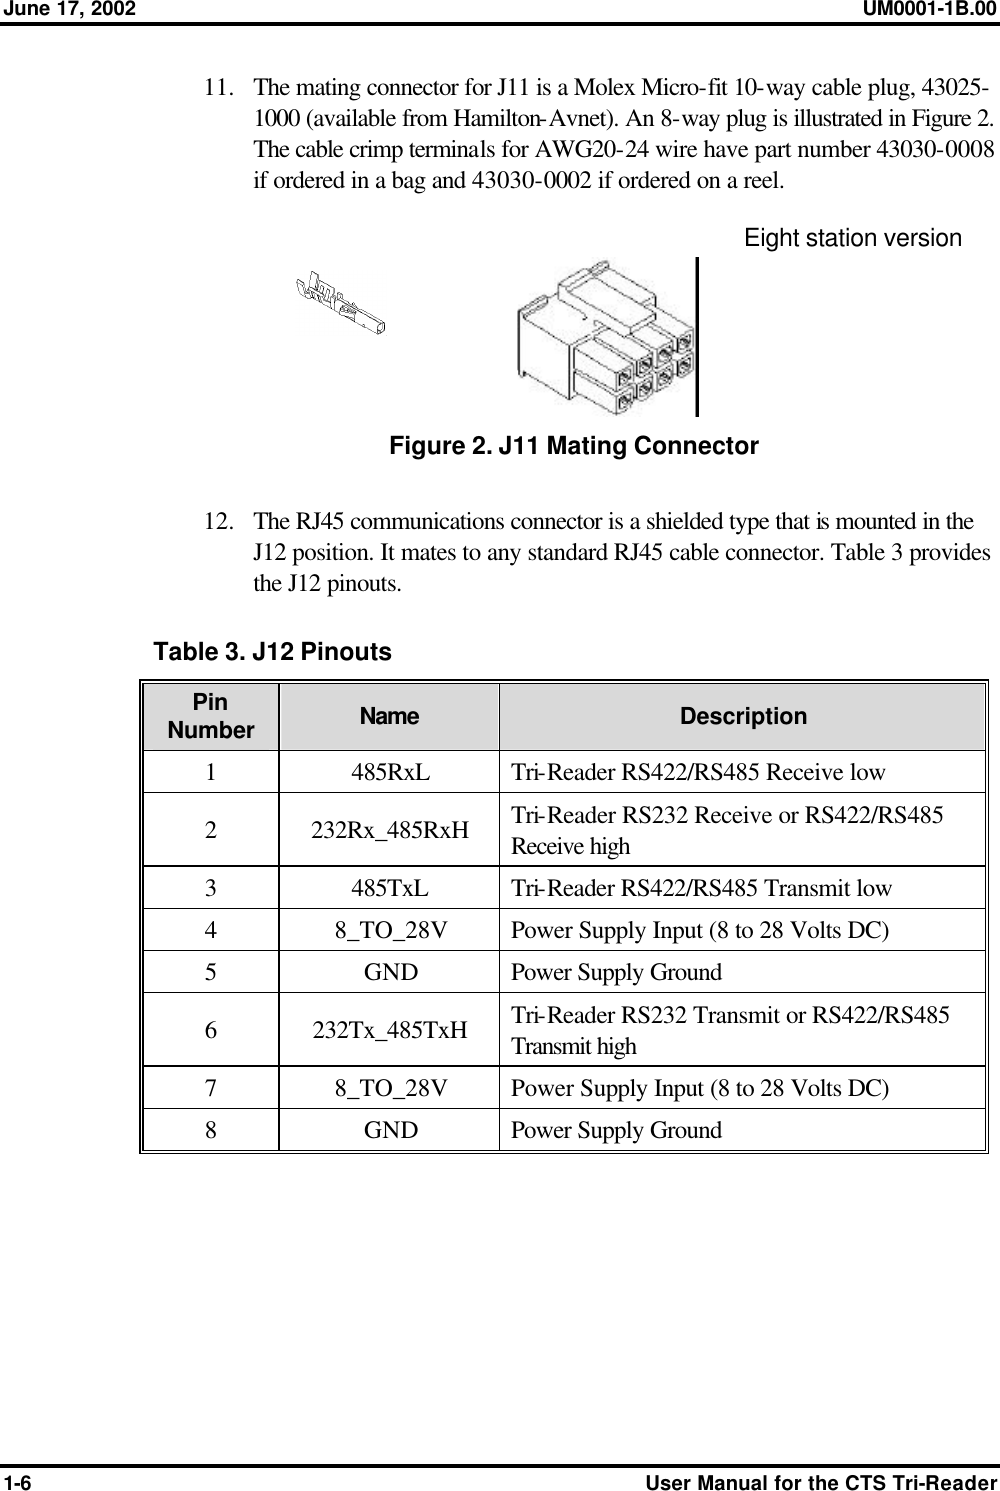 June 17, 2002 UM0001-1B.00  1-6 User Manual for the CTS Tri-Reader 11.  The mating connector for J11 is a Molex Micro-fit 10-way cable plug, 43025-1000 (available from Hamilton-Avnet). An 8-way plug is illustrated in Figure 2. The cable crimp terminals for AWG20-24 wire have part number 43030-0008 if ordered in a bag and 43030-0002 if ordered on a reel.  Figure 2. J11 Mating Connector  12.  The RJ45 communications connector is a shielded type that is mounted in the J12 position. It mates to any standard RJ45 cable connector. Table 3 provides the J12 pinouts. Table 3. J12 Pinouts Pin Number Name Description 1  485RxL Tri-Reader RS422/RS485 Receive low 2  232Rx_485RxH Tri-Reader RS232 Receive or RS422/RS485 Receive high 3  485TxL Tri-Reader RS422/RS485 Transmit low 4  8_TO_28V Power Supply Input (8 to 28 Volts DC) 5  GND Power Supply Ground 6  232Tx_485TxH Tri-Reader RS232 Transmit or RS422/RS485 Transmit high 7  8_TO_28V Power Supply Input (8 to 28 Volts DC) 8  GND Power Supply Ground   Eight station version shown. 